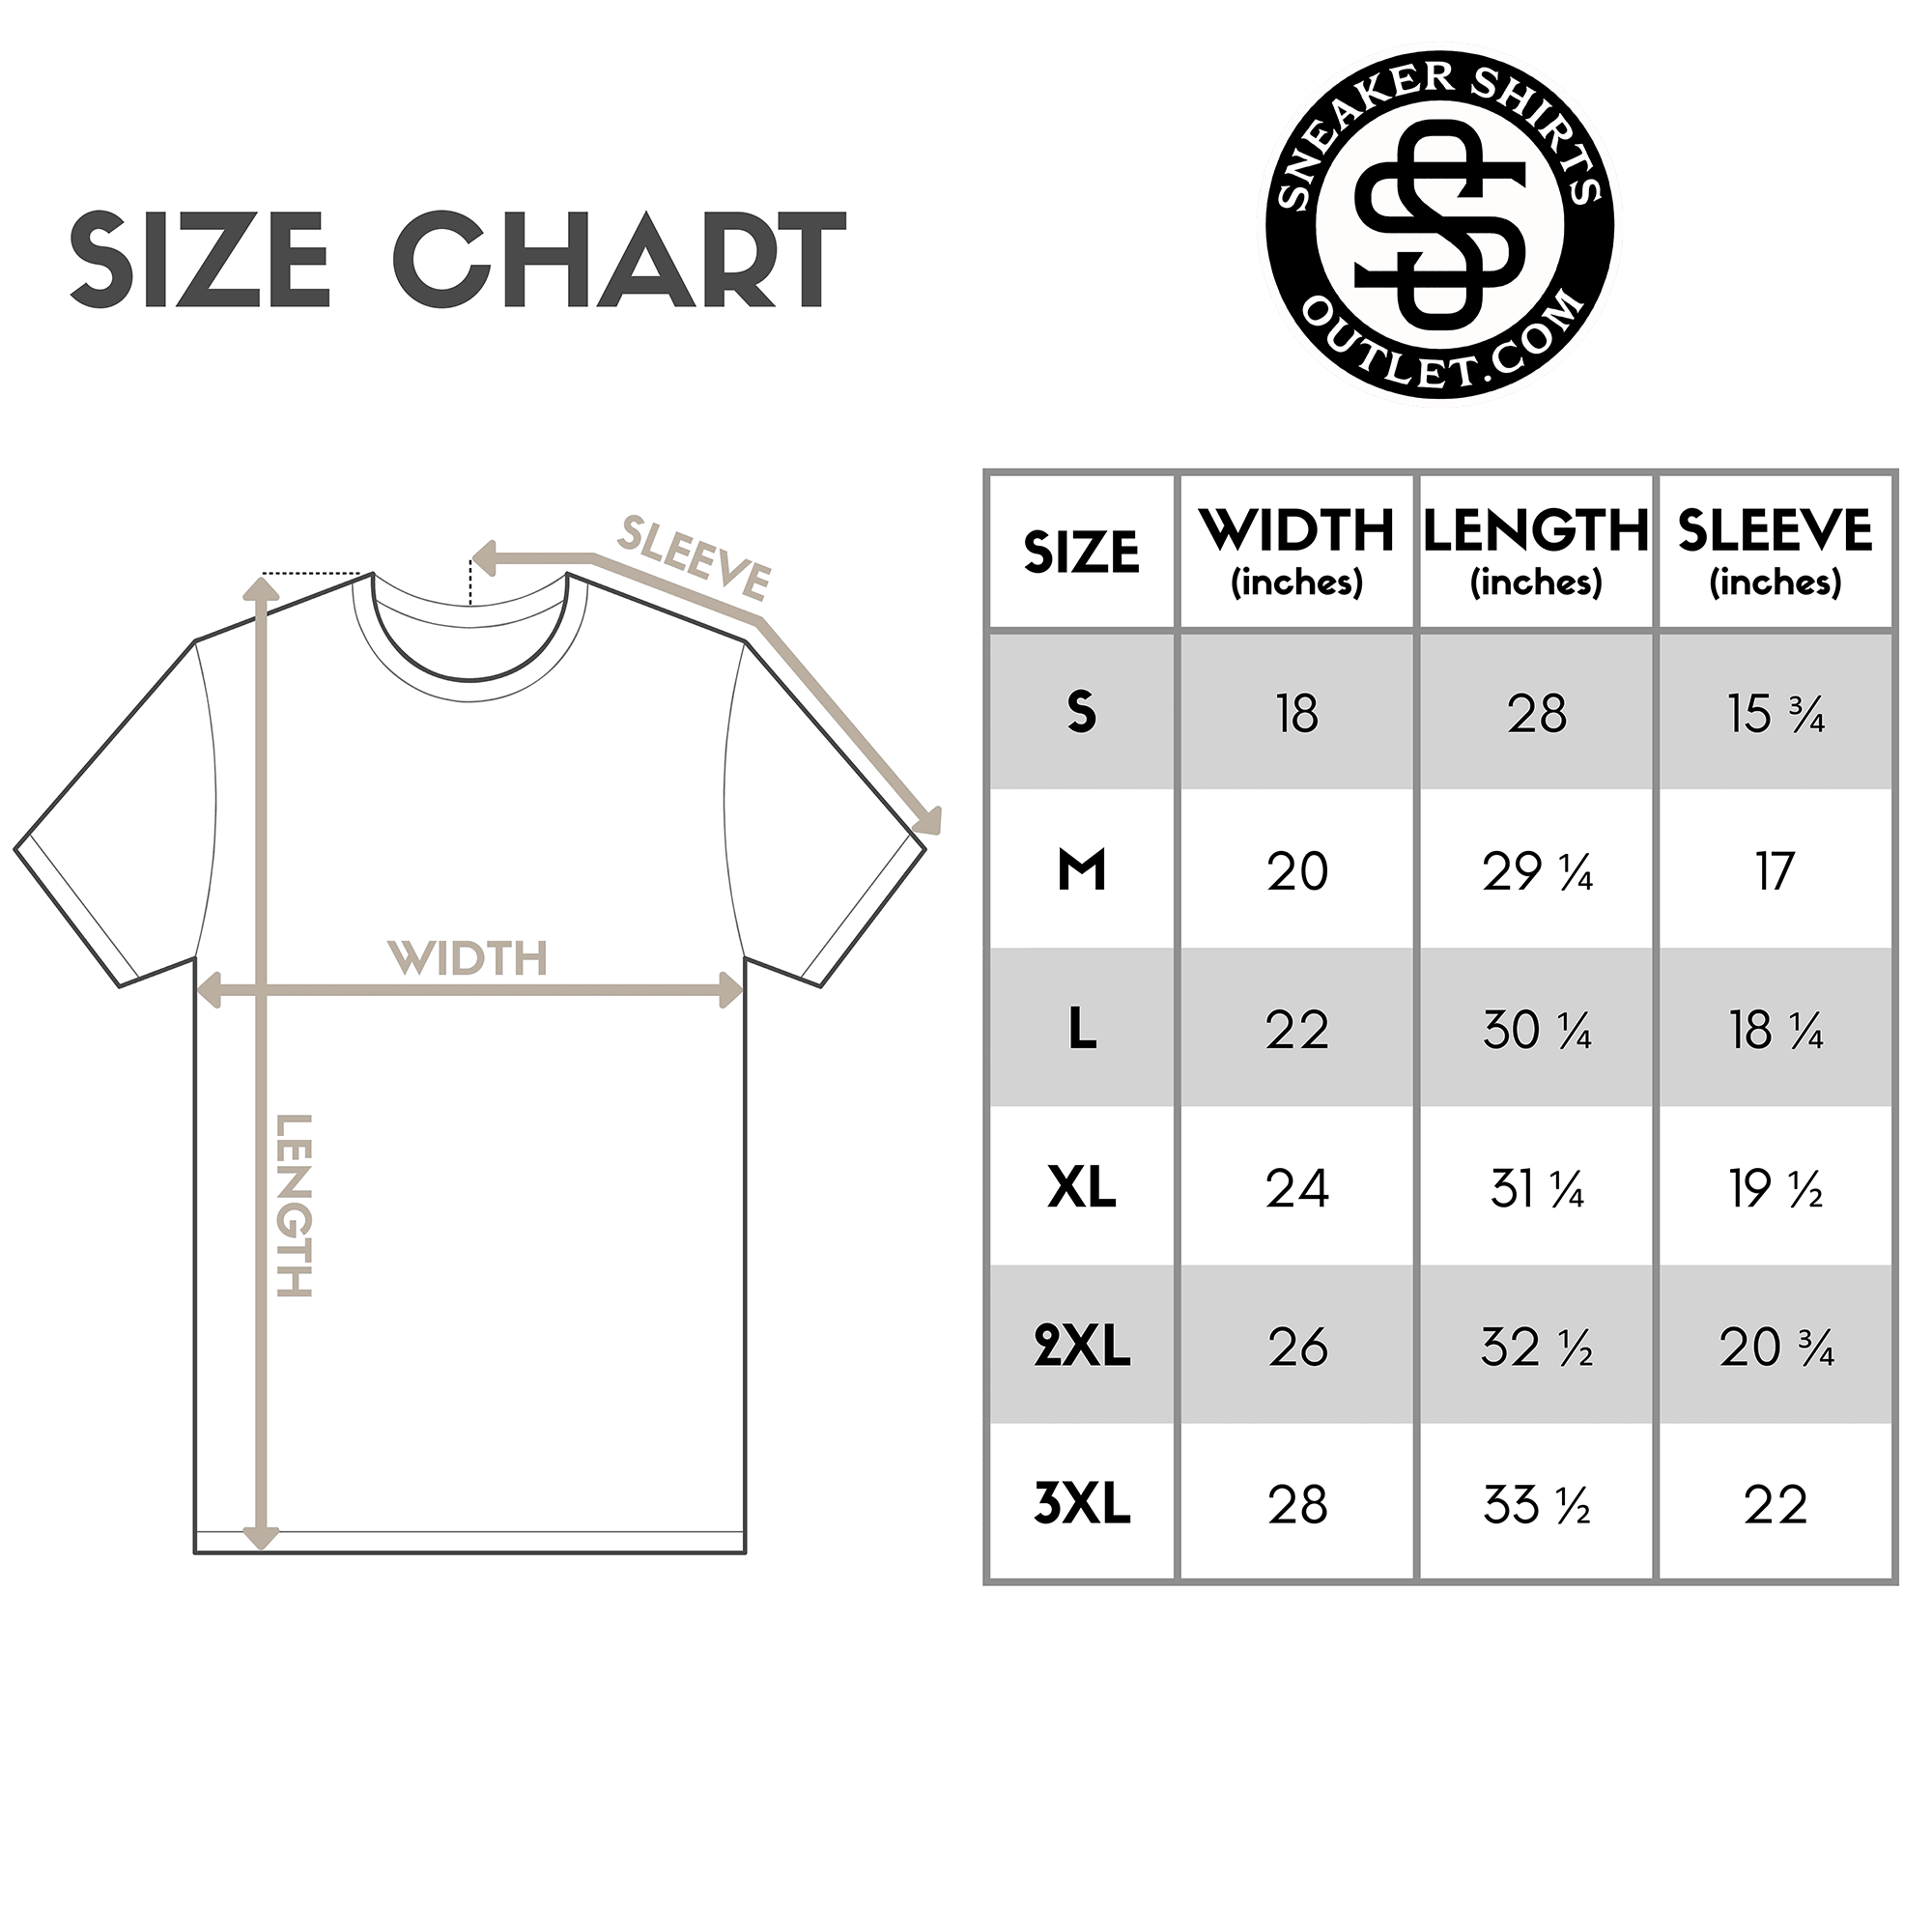 Never Bend Shirt by Dope Star Clothing® size chart photo